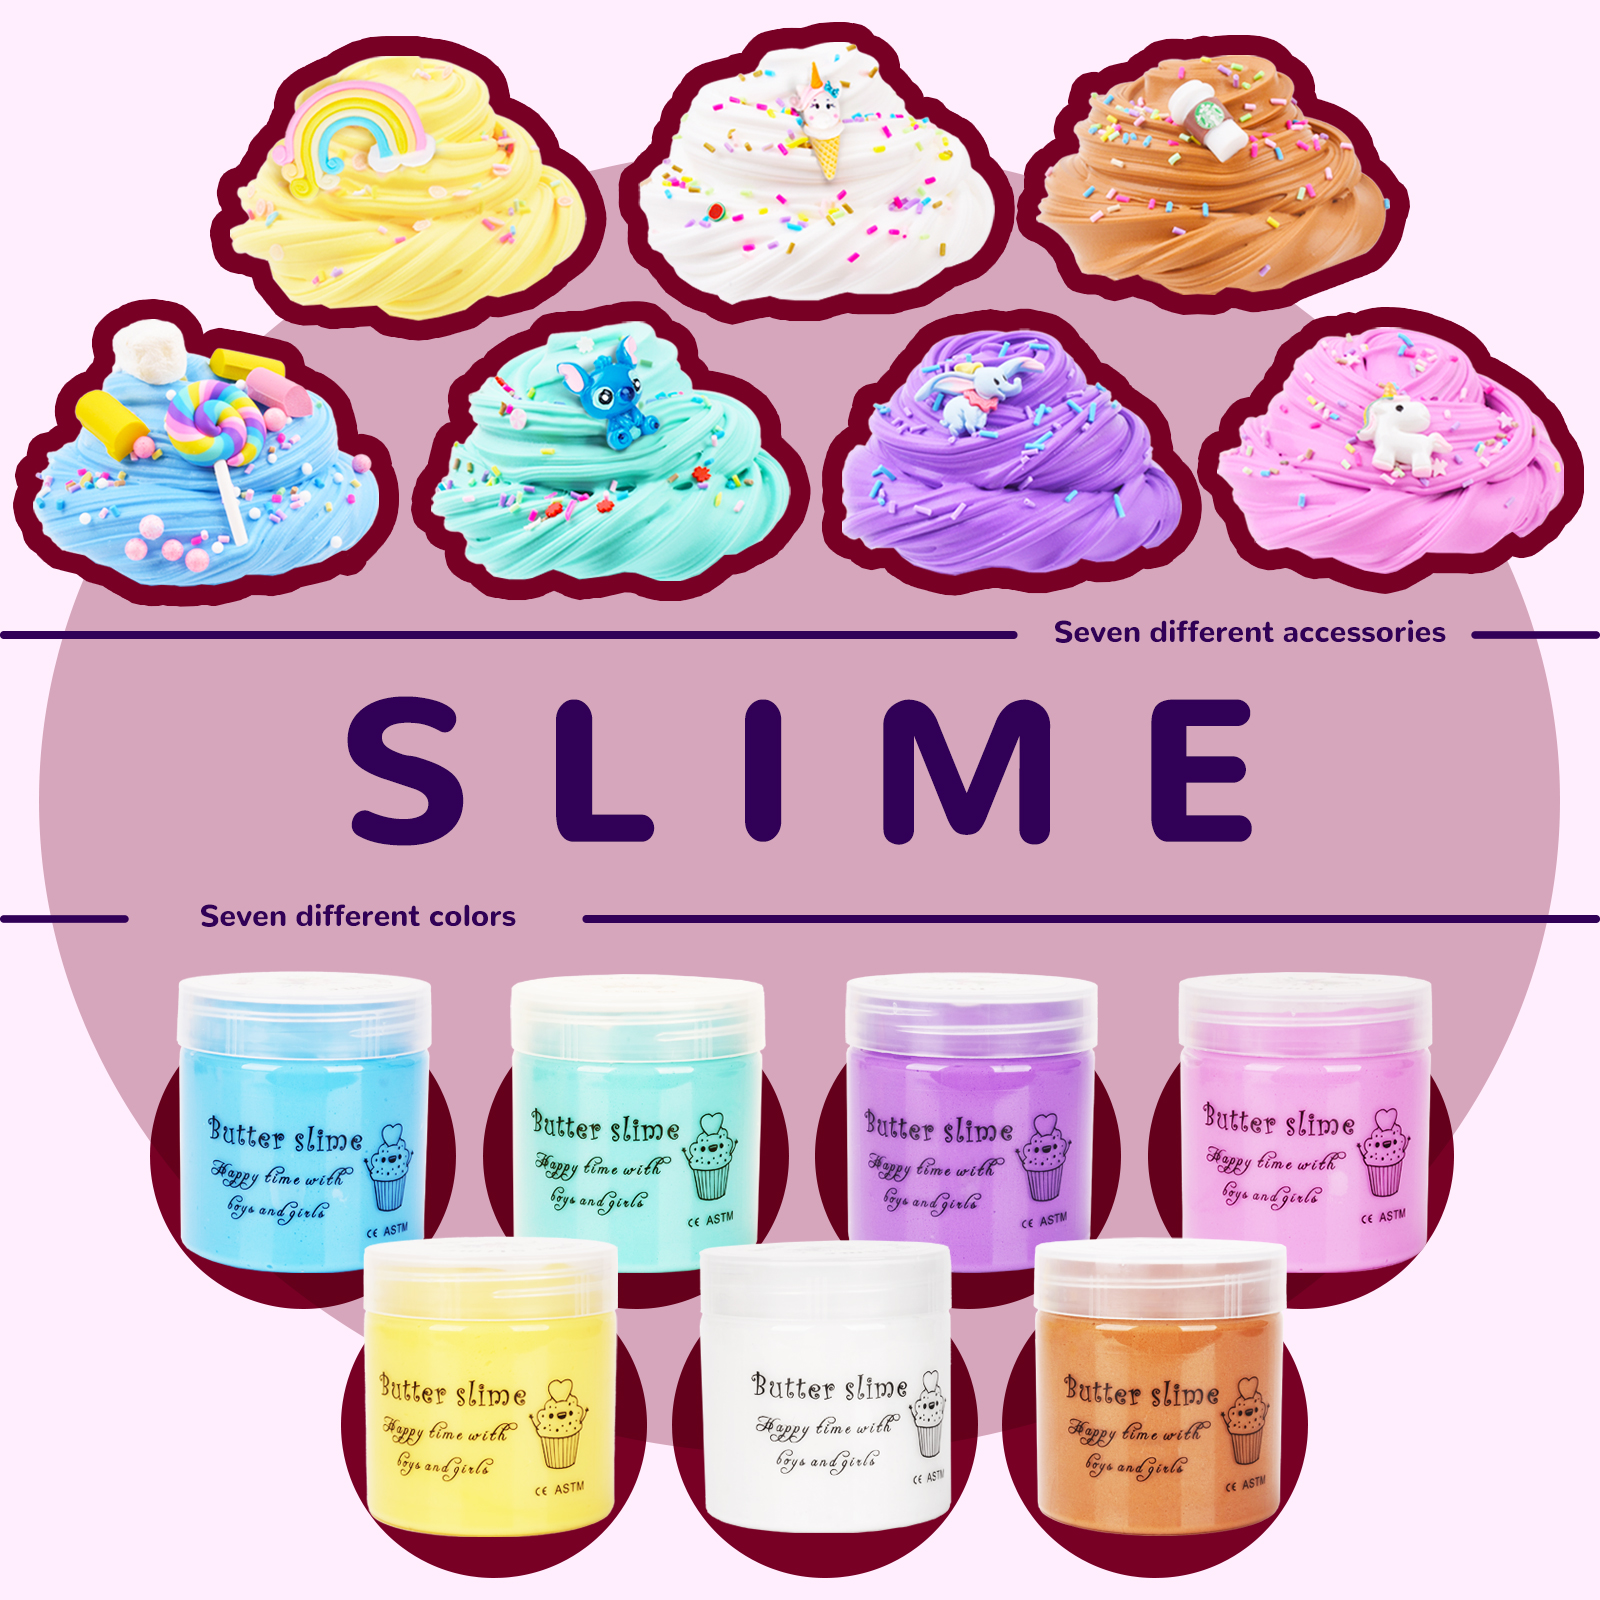 Dream Fun Slime Kits for 6 7 8 9 10 Year Old Girls Putty Slimes Set for 5 6 7 8 9 11 Years Old Kids Birthday Gifts Present Fluffy Slime Toys for Children Age 8 Years - image 2 of 7